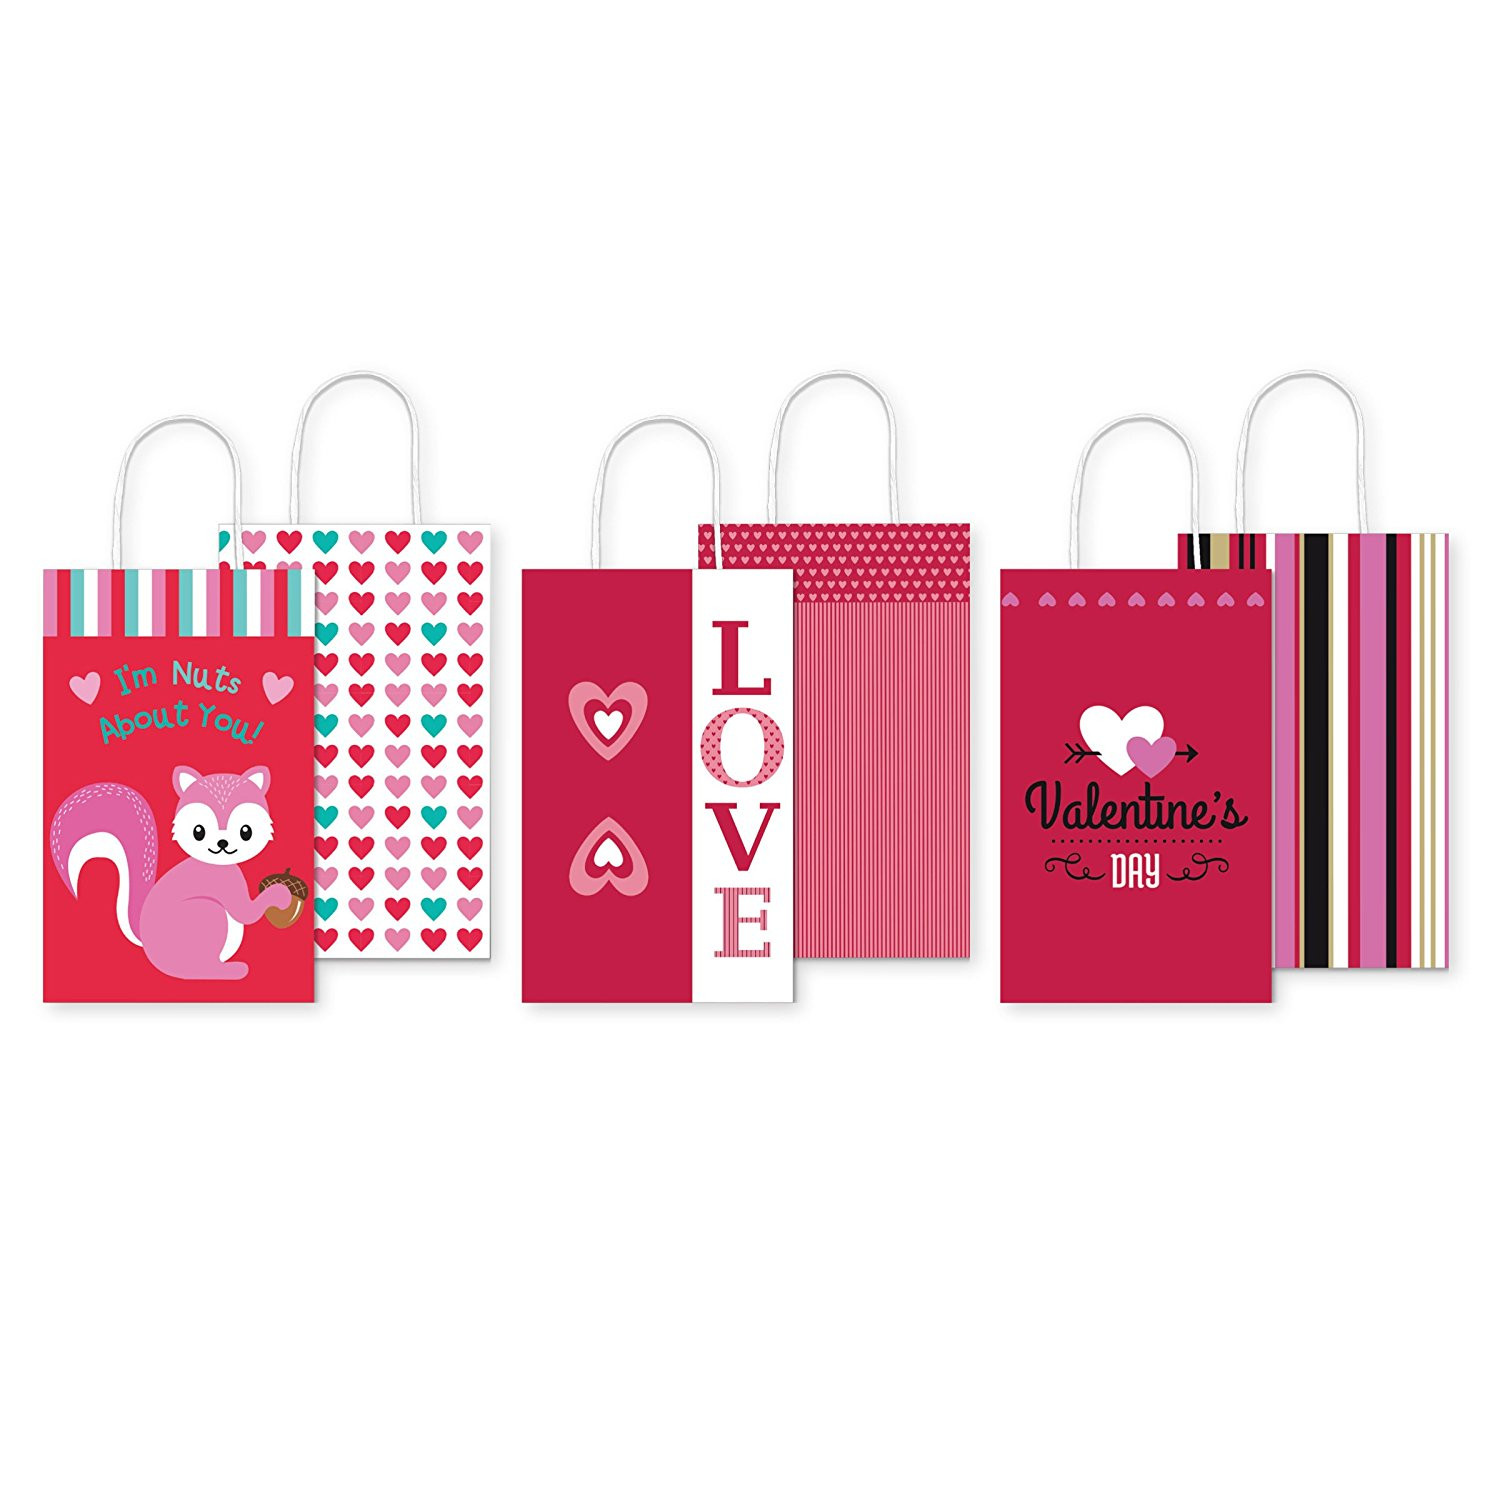 Valentines Day Gift Bags
 Pack of 6 Small Kraft Valentine s Day Gift Bags Perfect